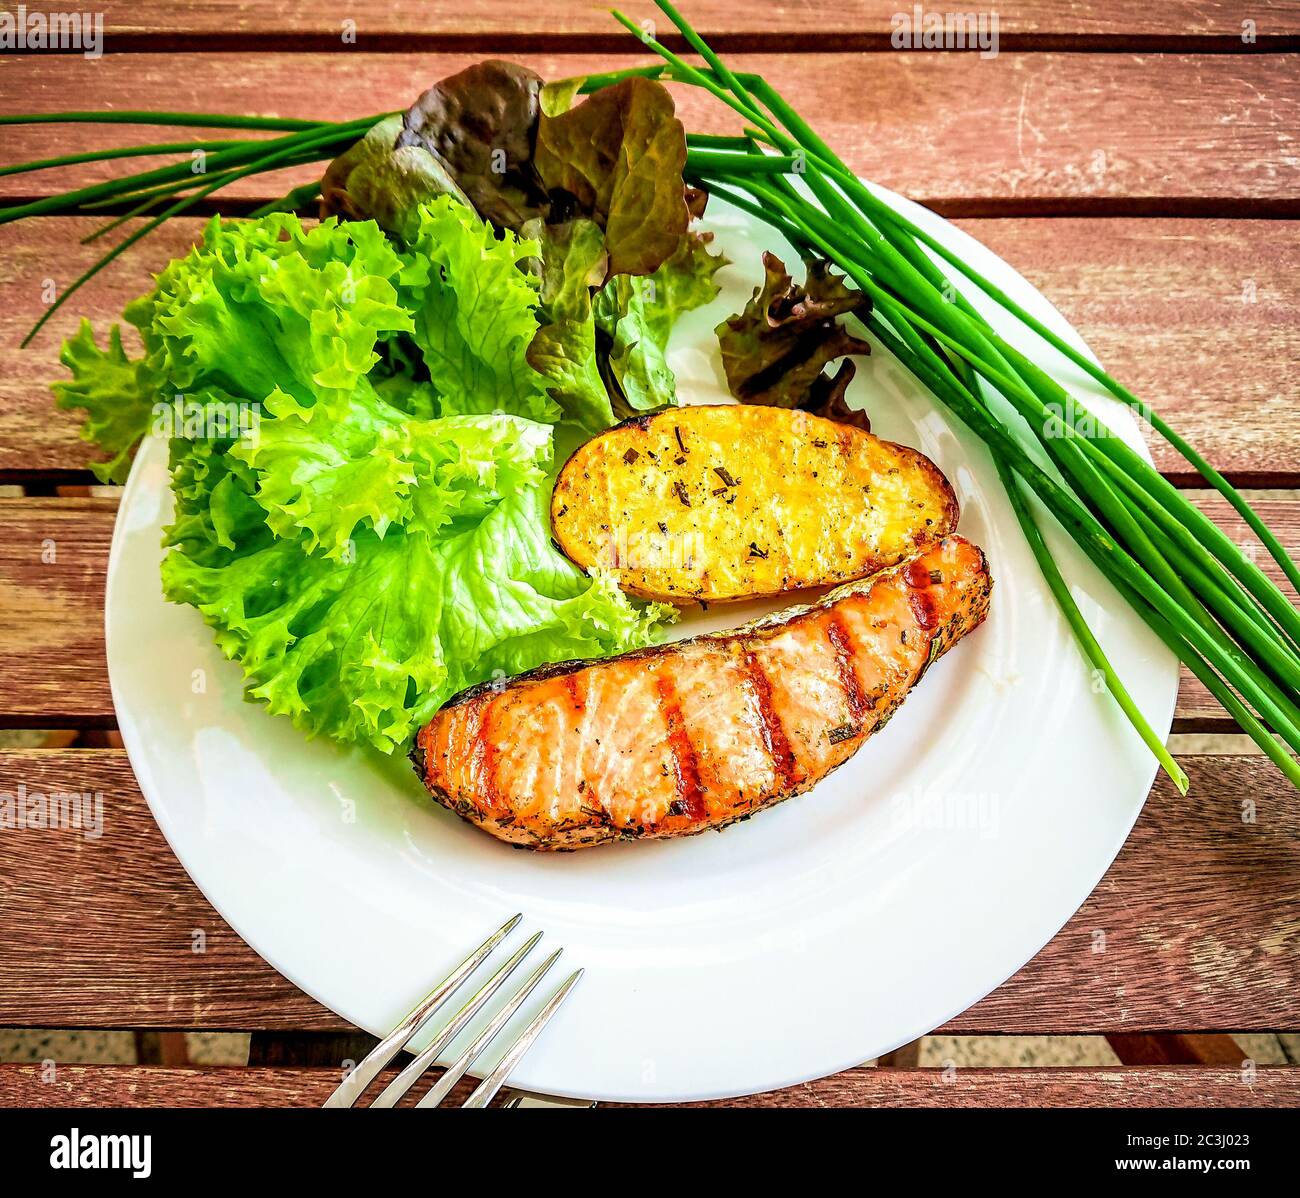 Grilled salmon fillet with potato and salad, top view Stock Photo